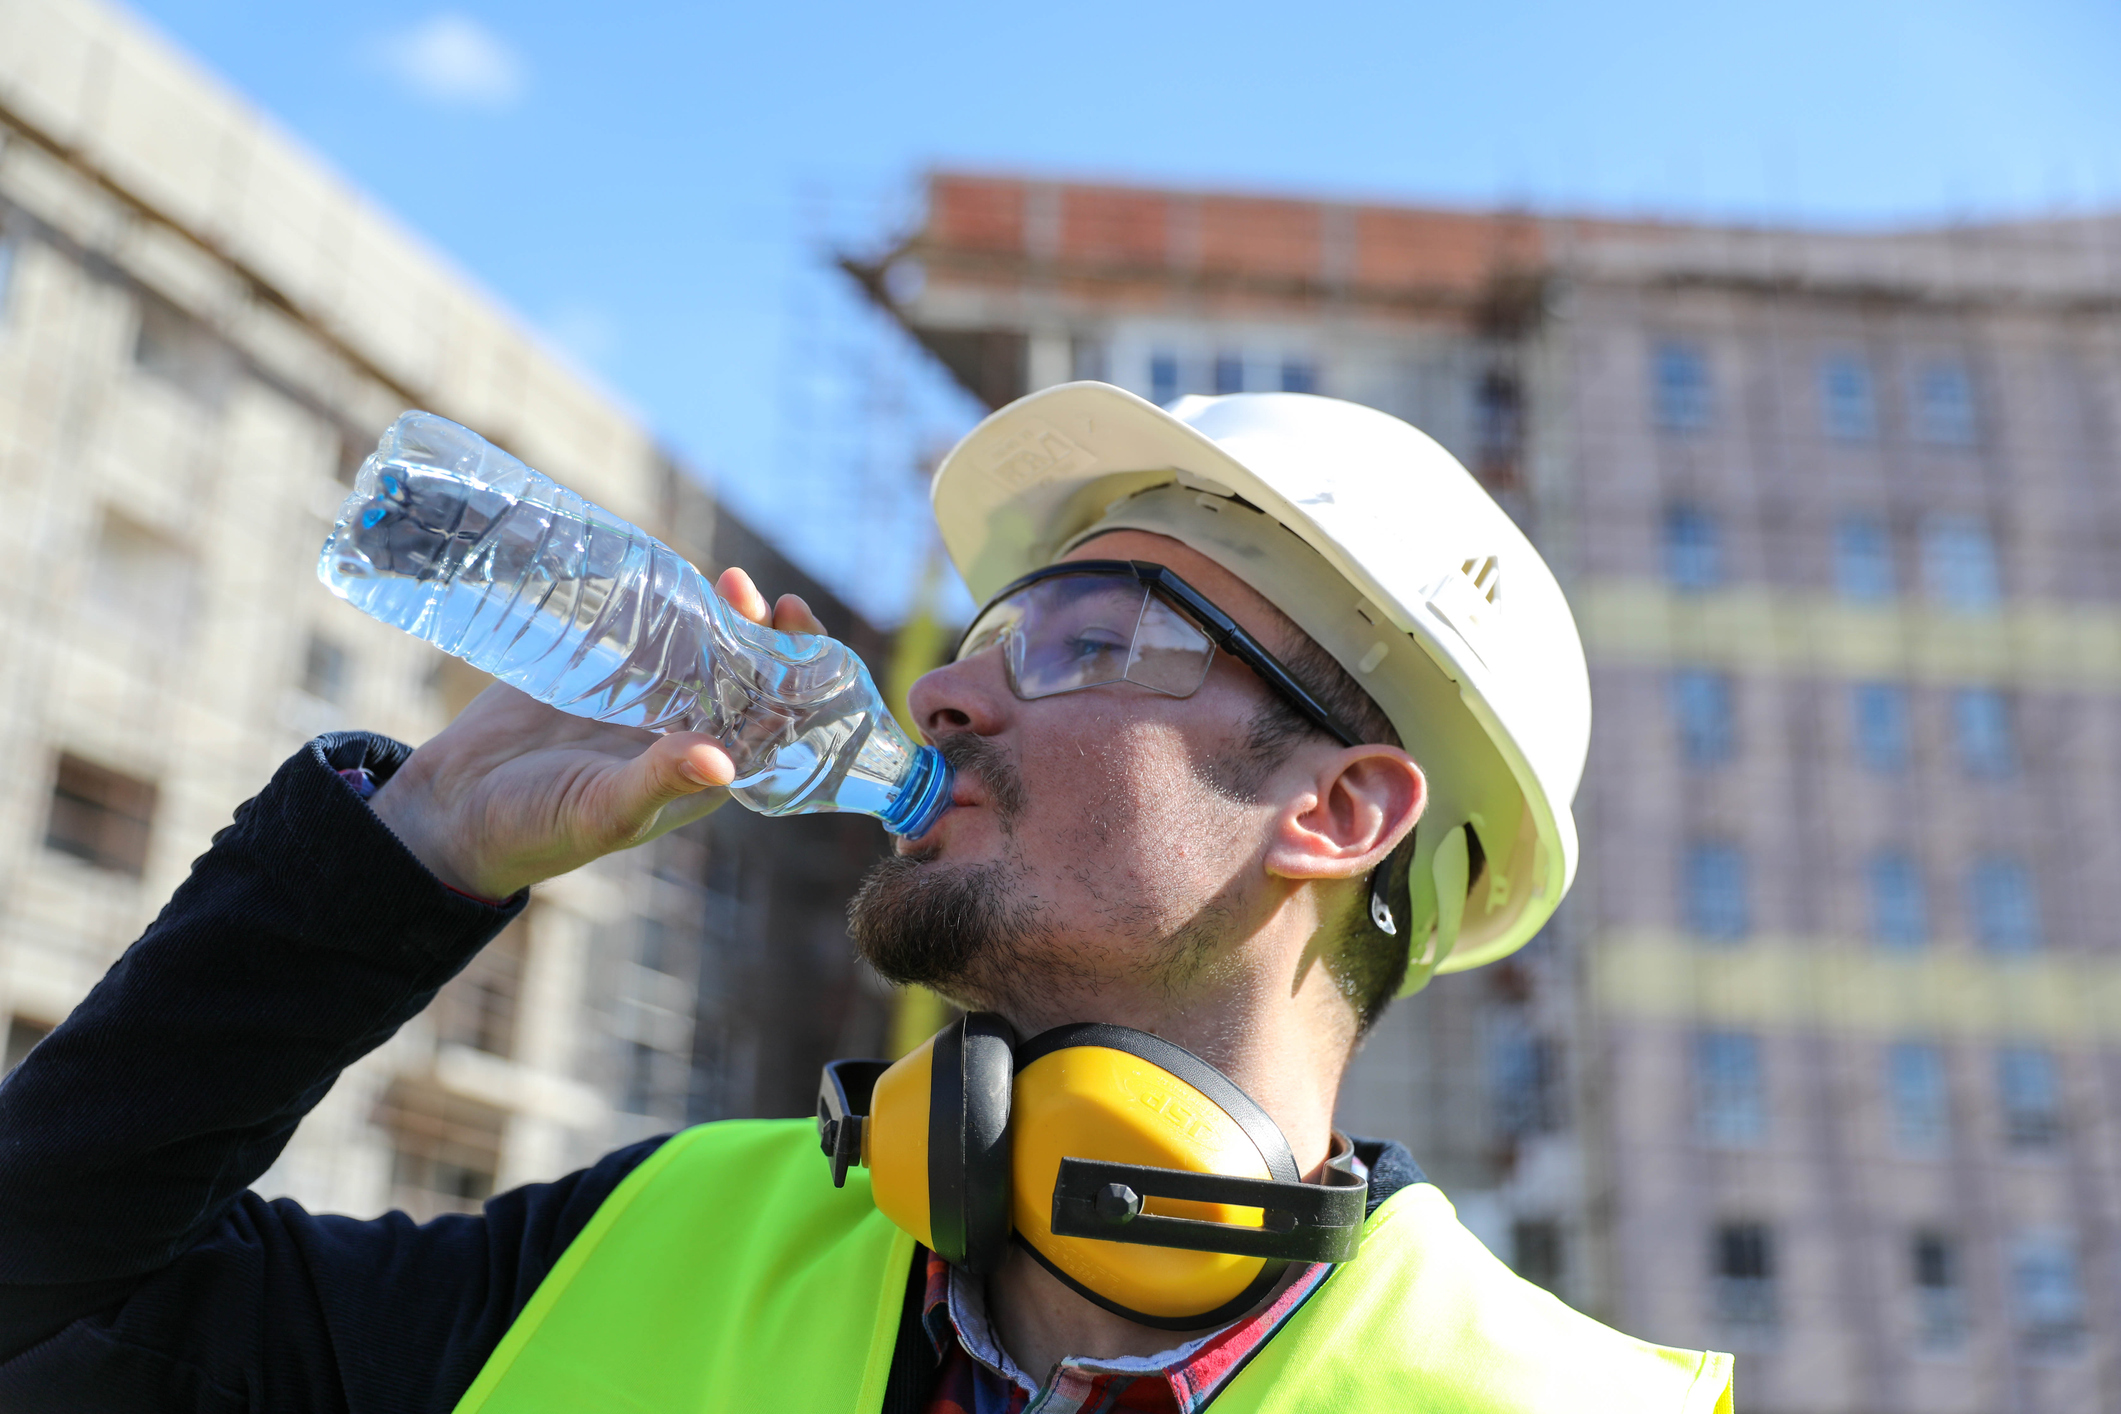 Worker at construction site on a hot day hydrating